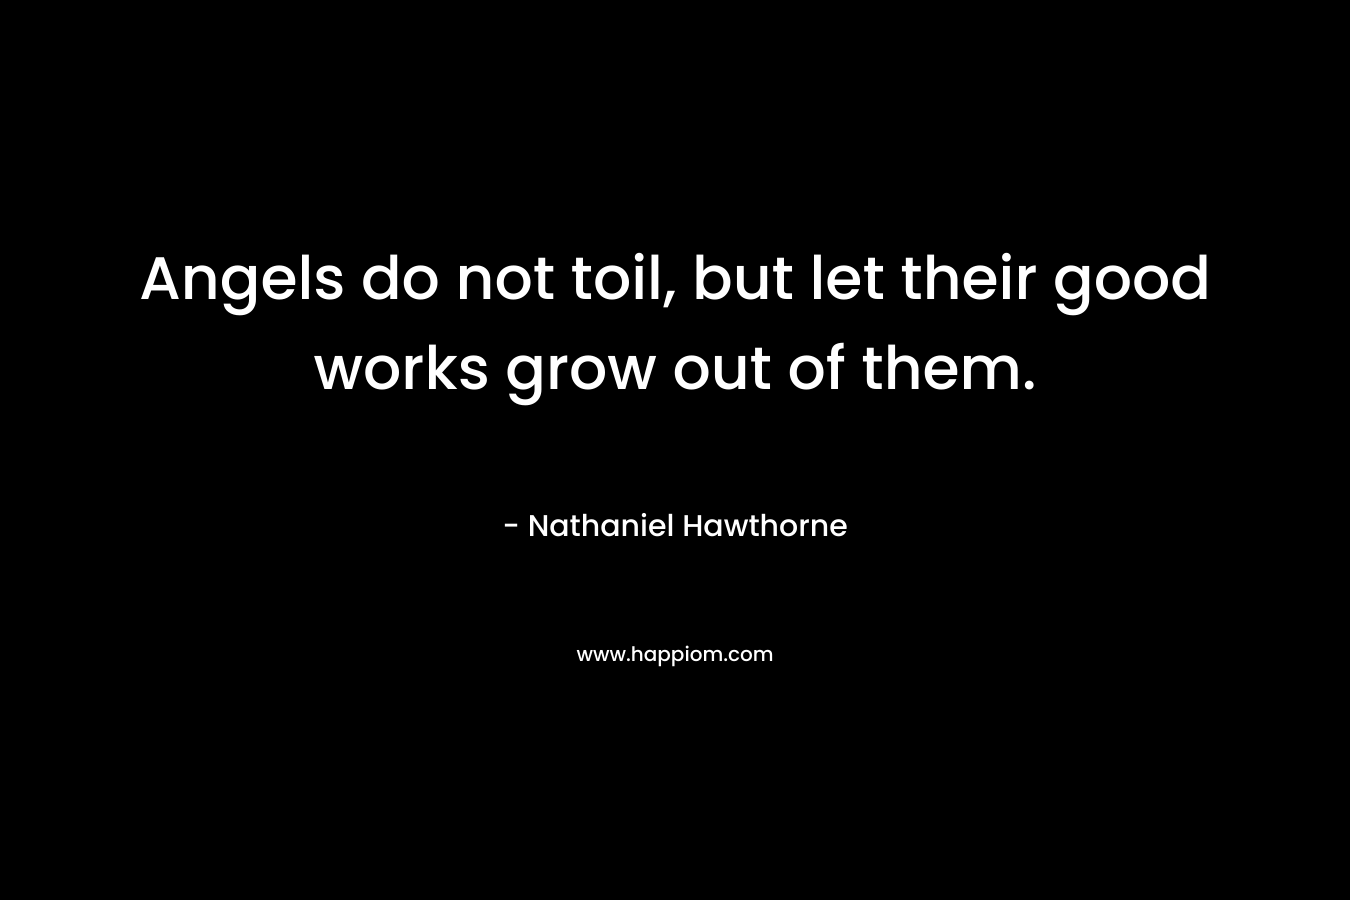 Angels do not toil, but let their good works grow out of them.